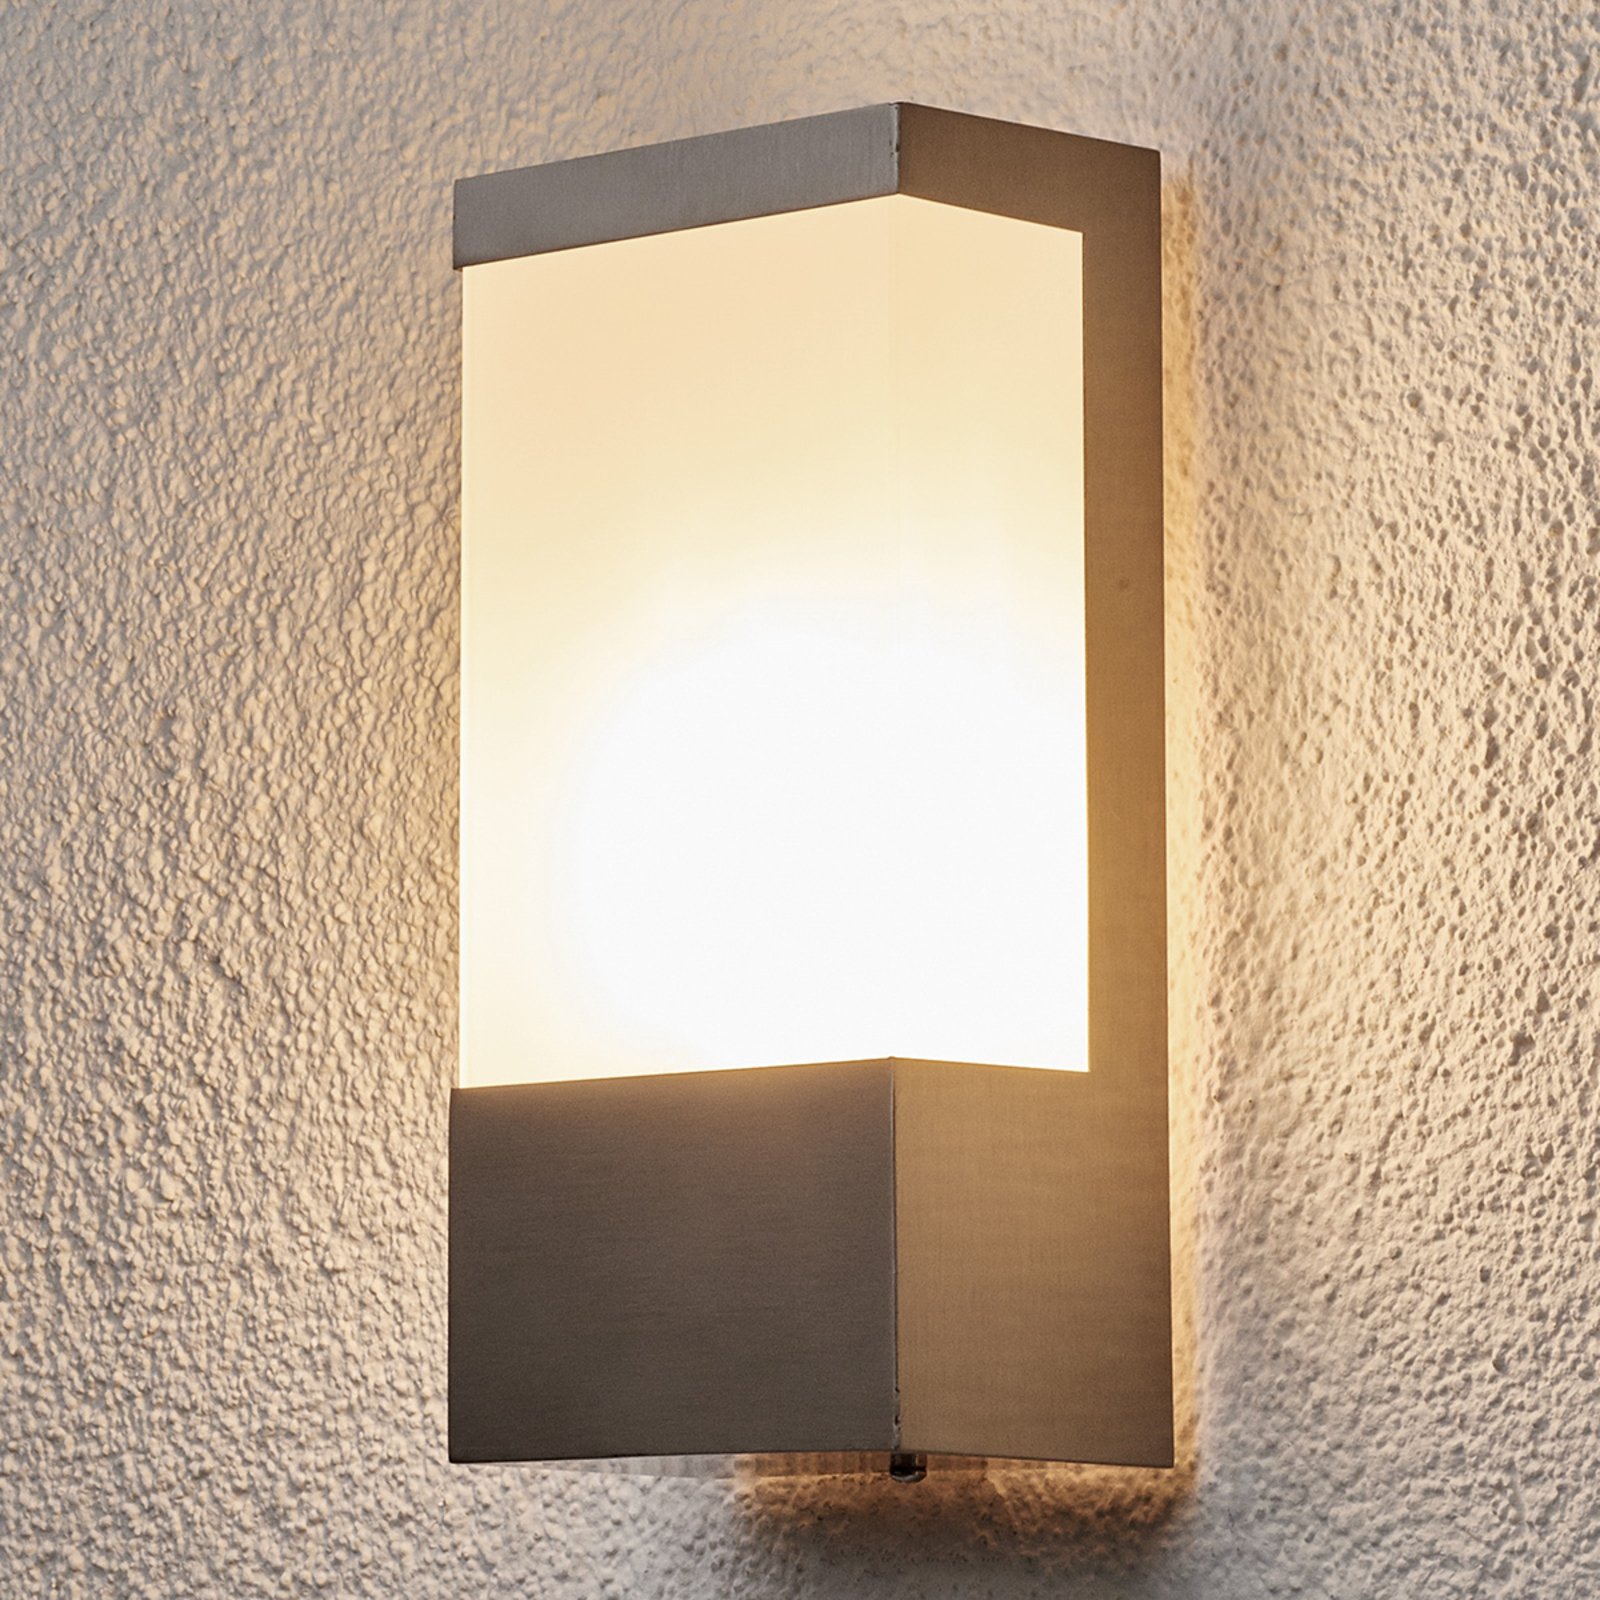 Square stainless steel outdoor wall light Kirana